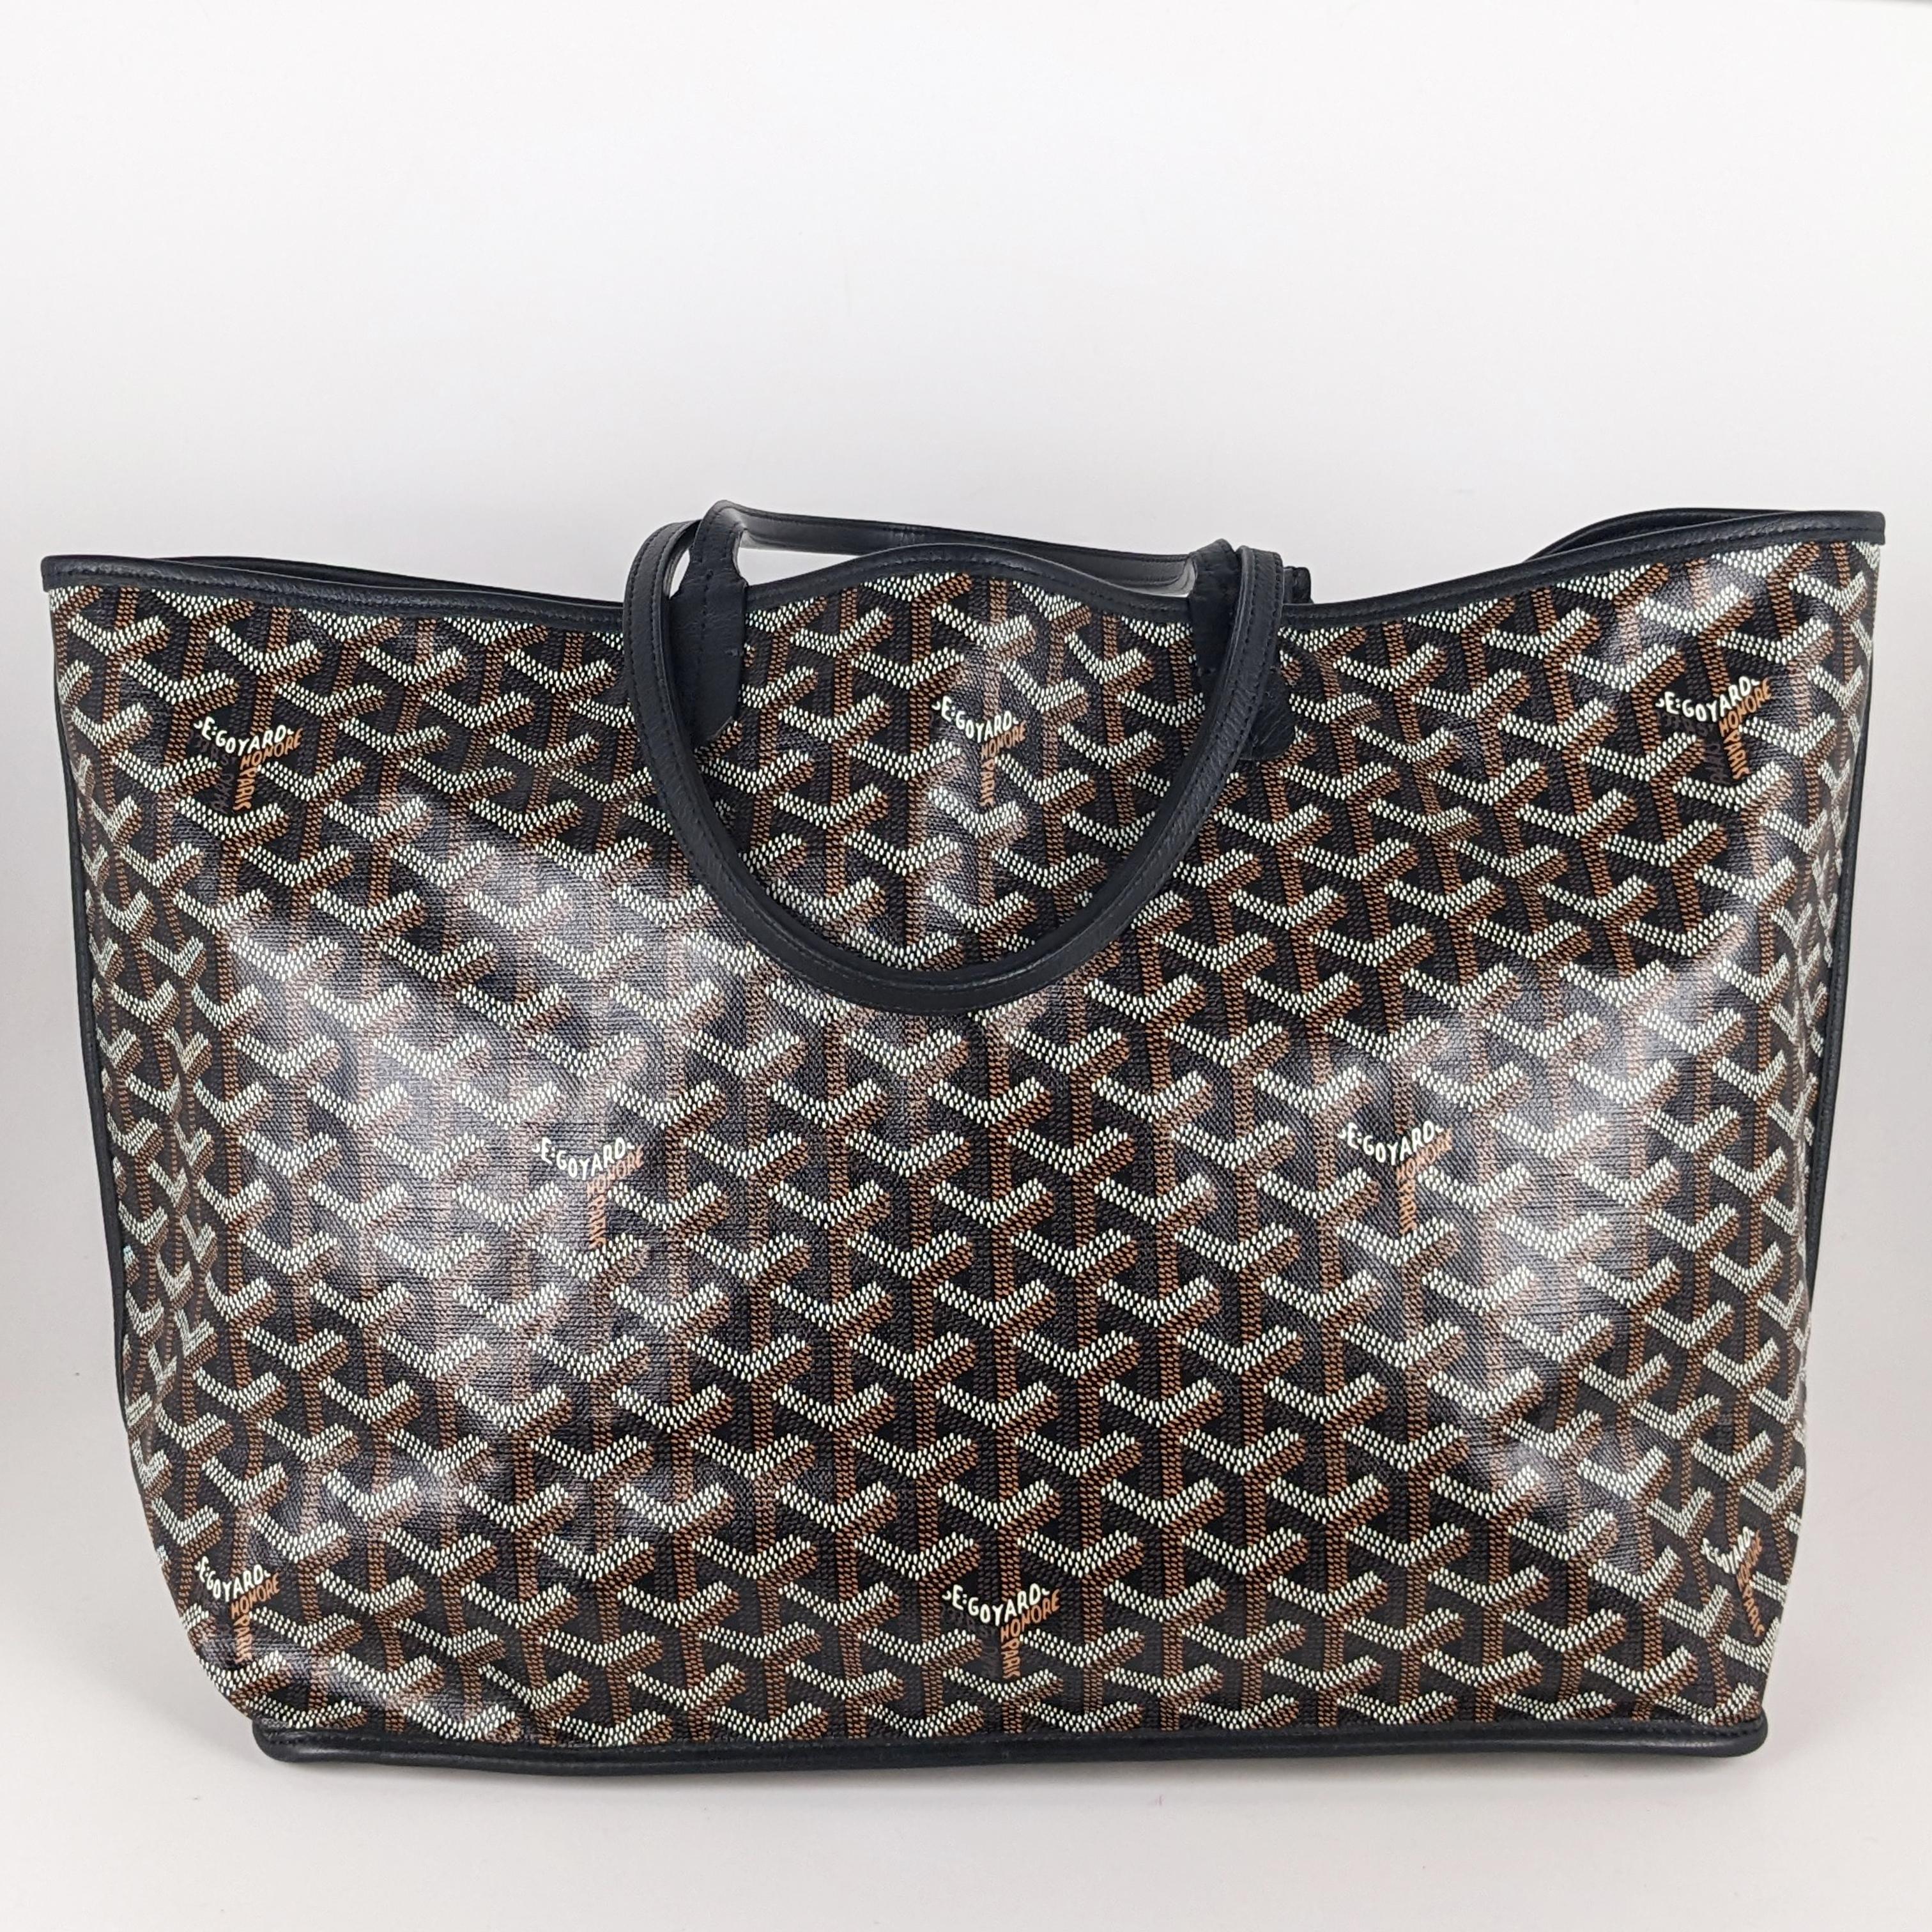 Condition: This authentic Goyard tote is in excellent condition. There is slight softening on the handles and very faint corner wear.

Includes: Removable pouch

Features: Goyard chevron on black canvas. The bag has a black leather trim along the